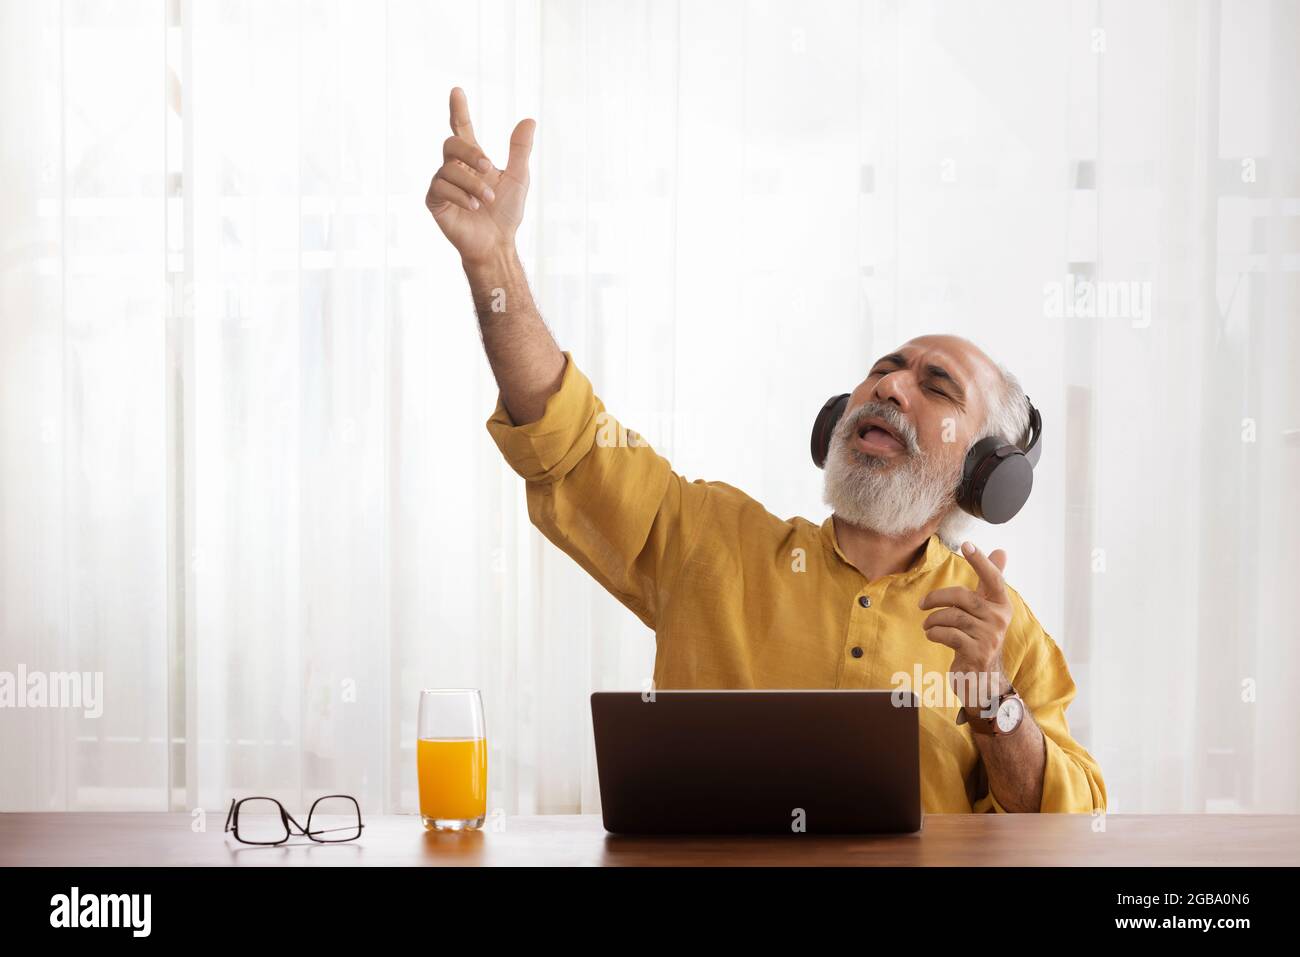 A HAPPY OLD MAN CHEERFULLY SINGING WHILE LISTENING TO MUSIC Stock Photo